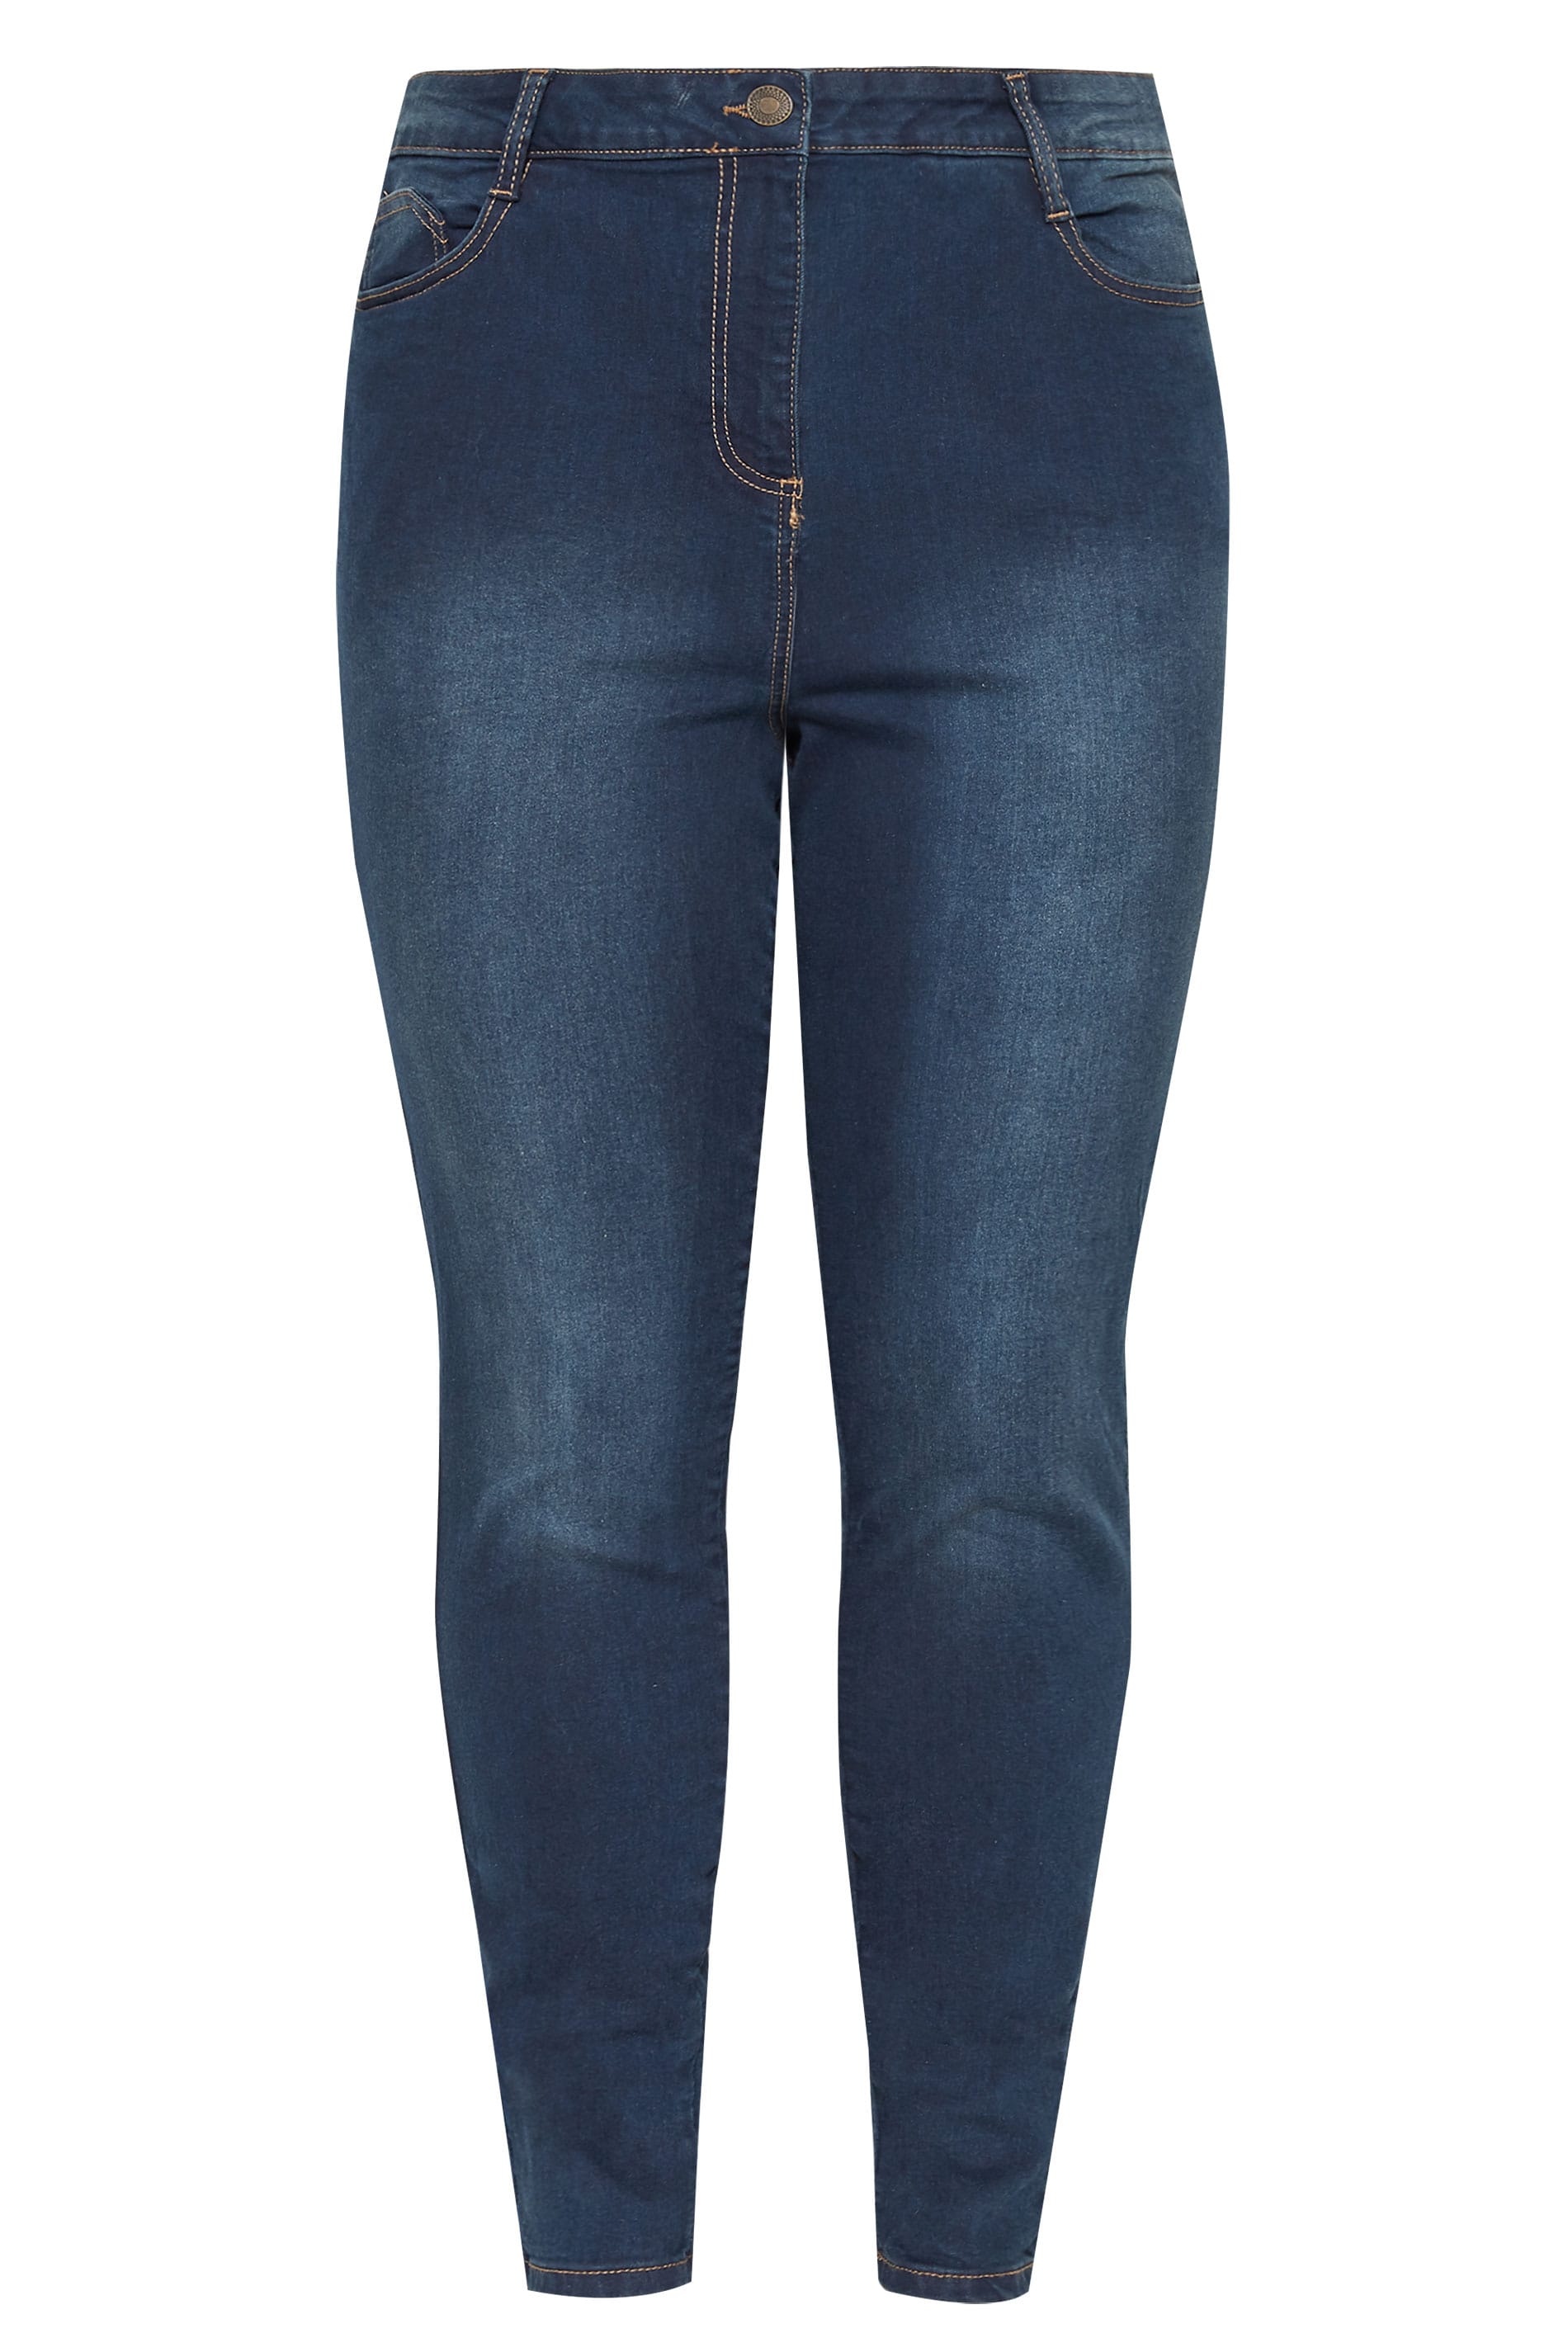 YOURS Curve Blue Distressed AVA Lift and Shape Stretch Skinny Jeans